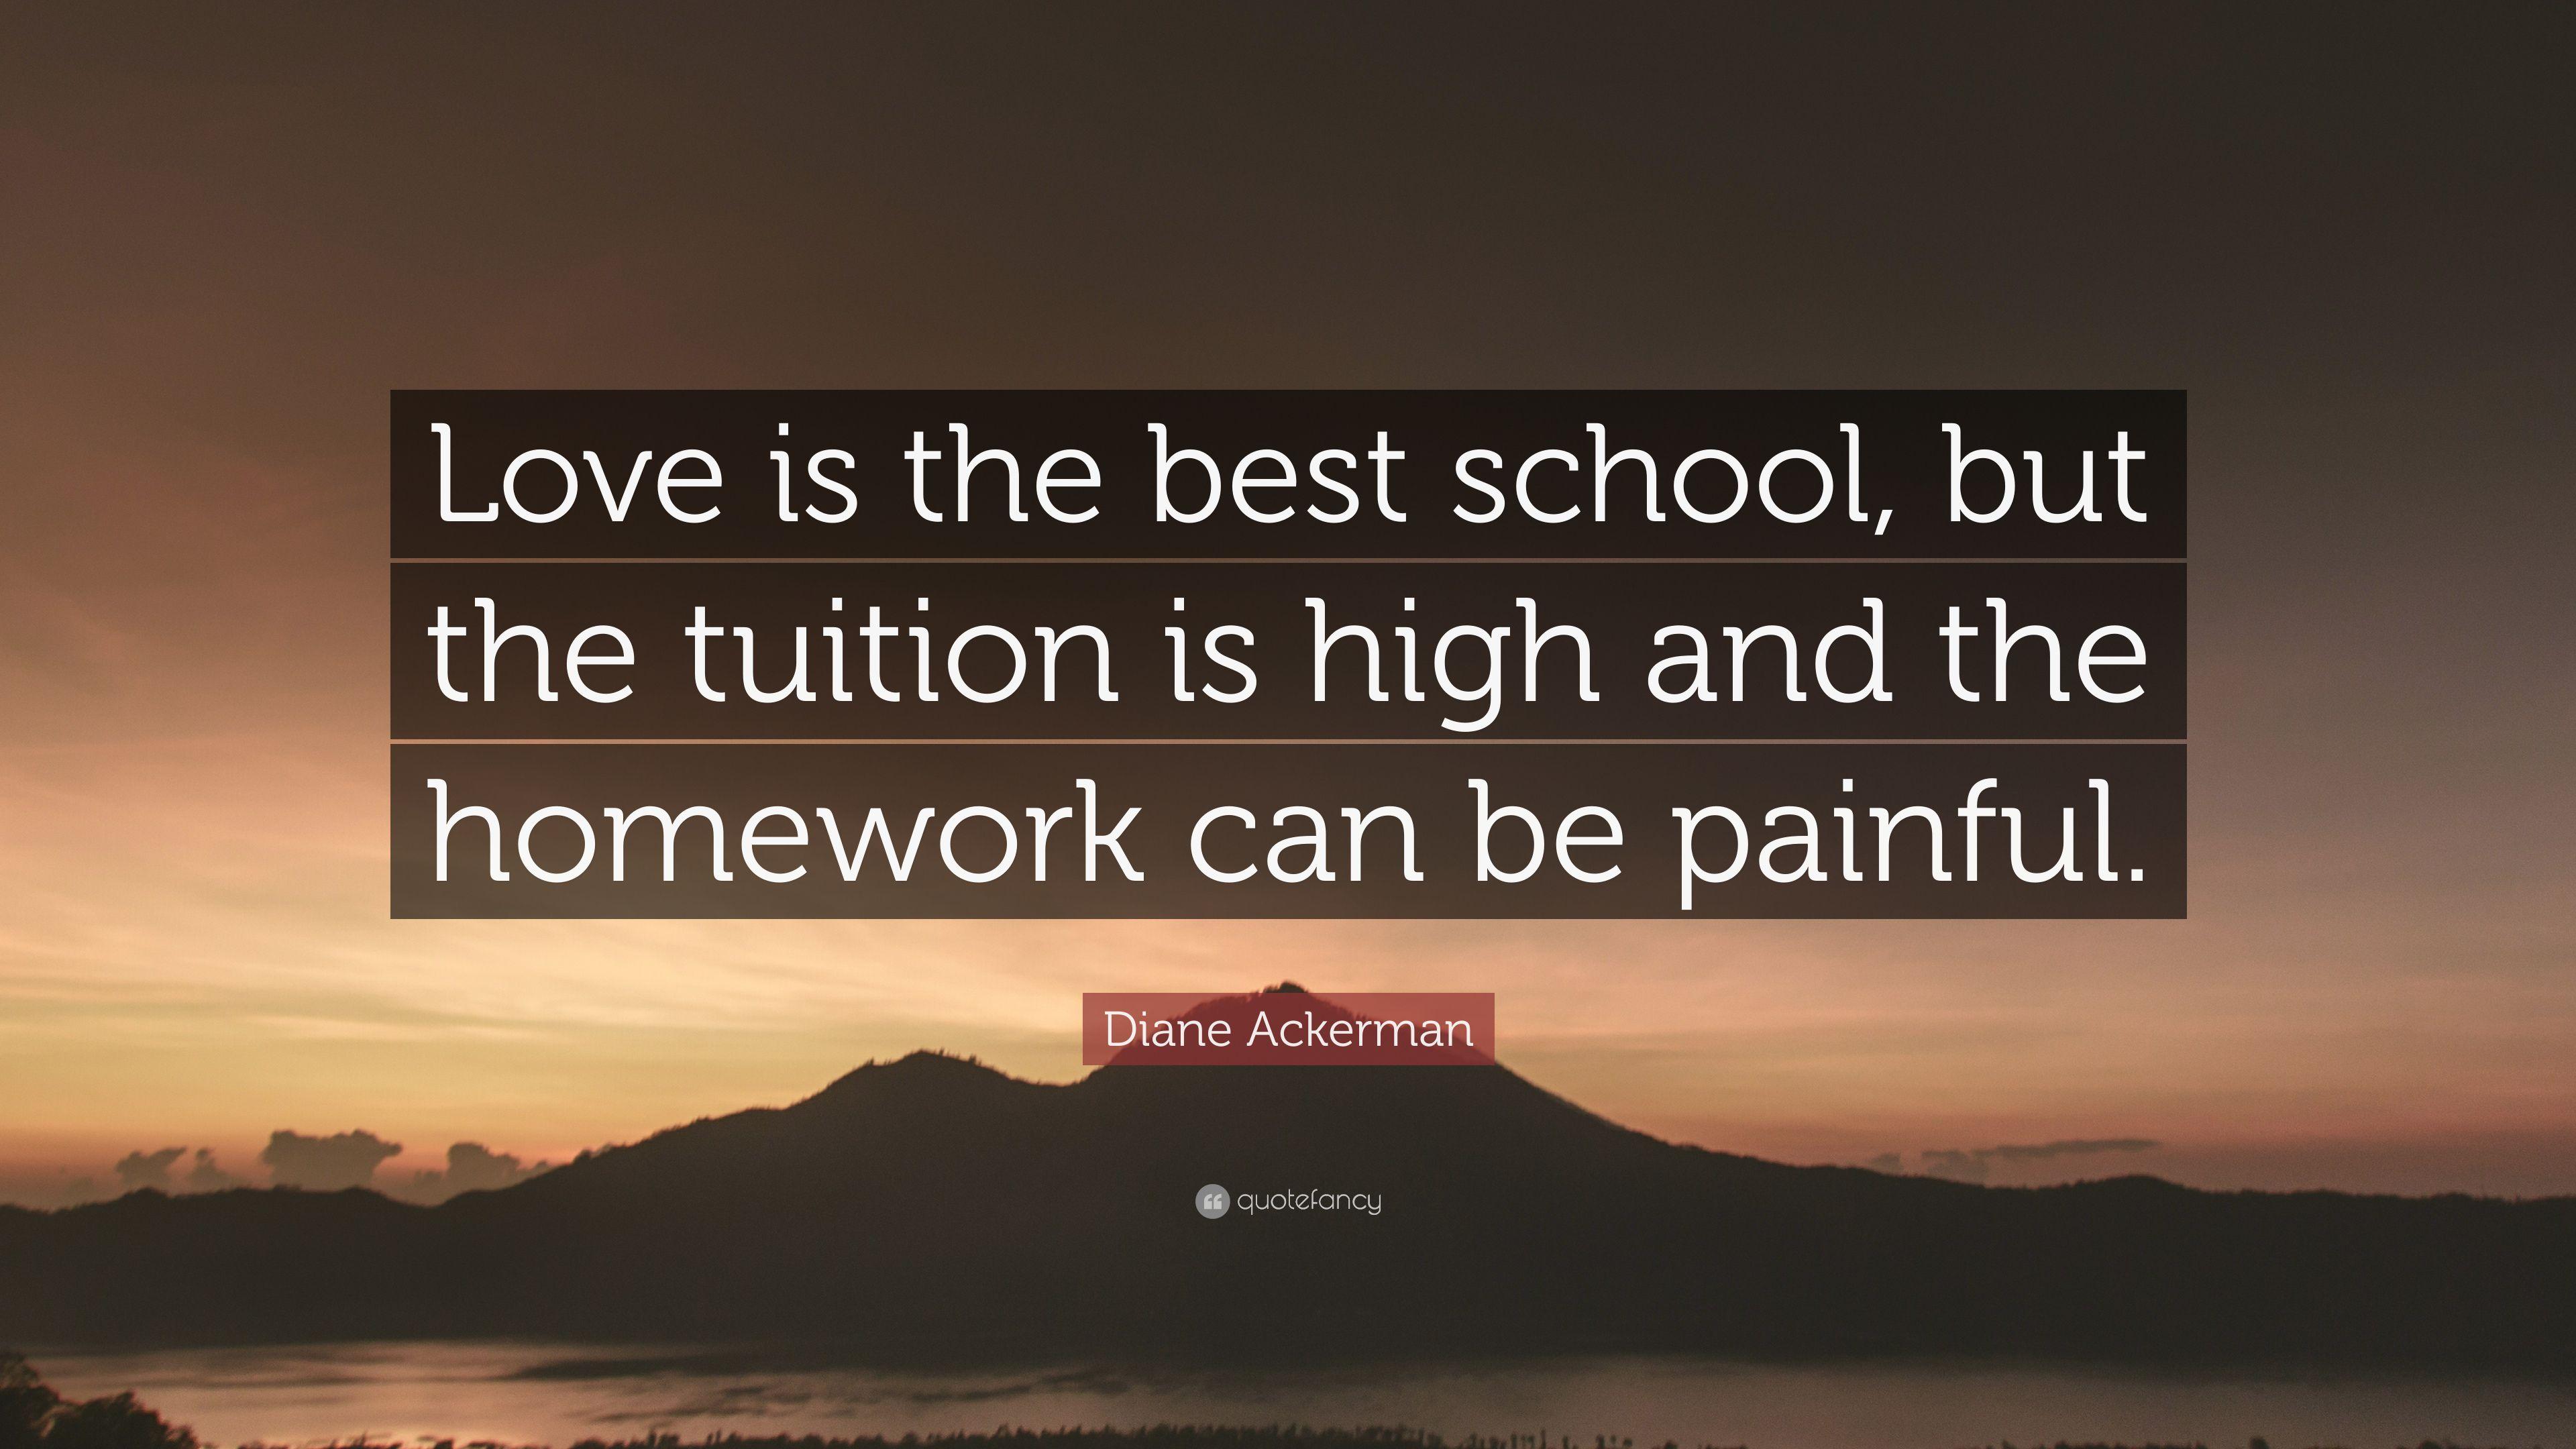 Diane Ackerman Quote: “Love is the best school, but the tuition is